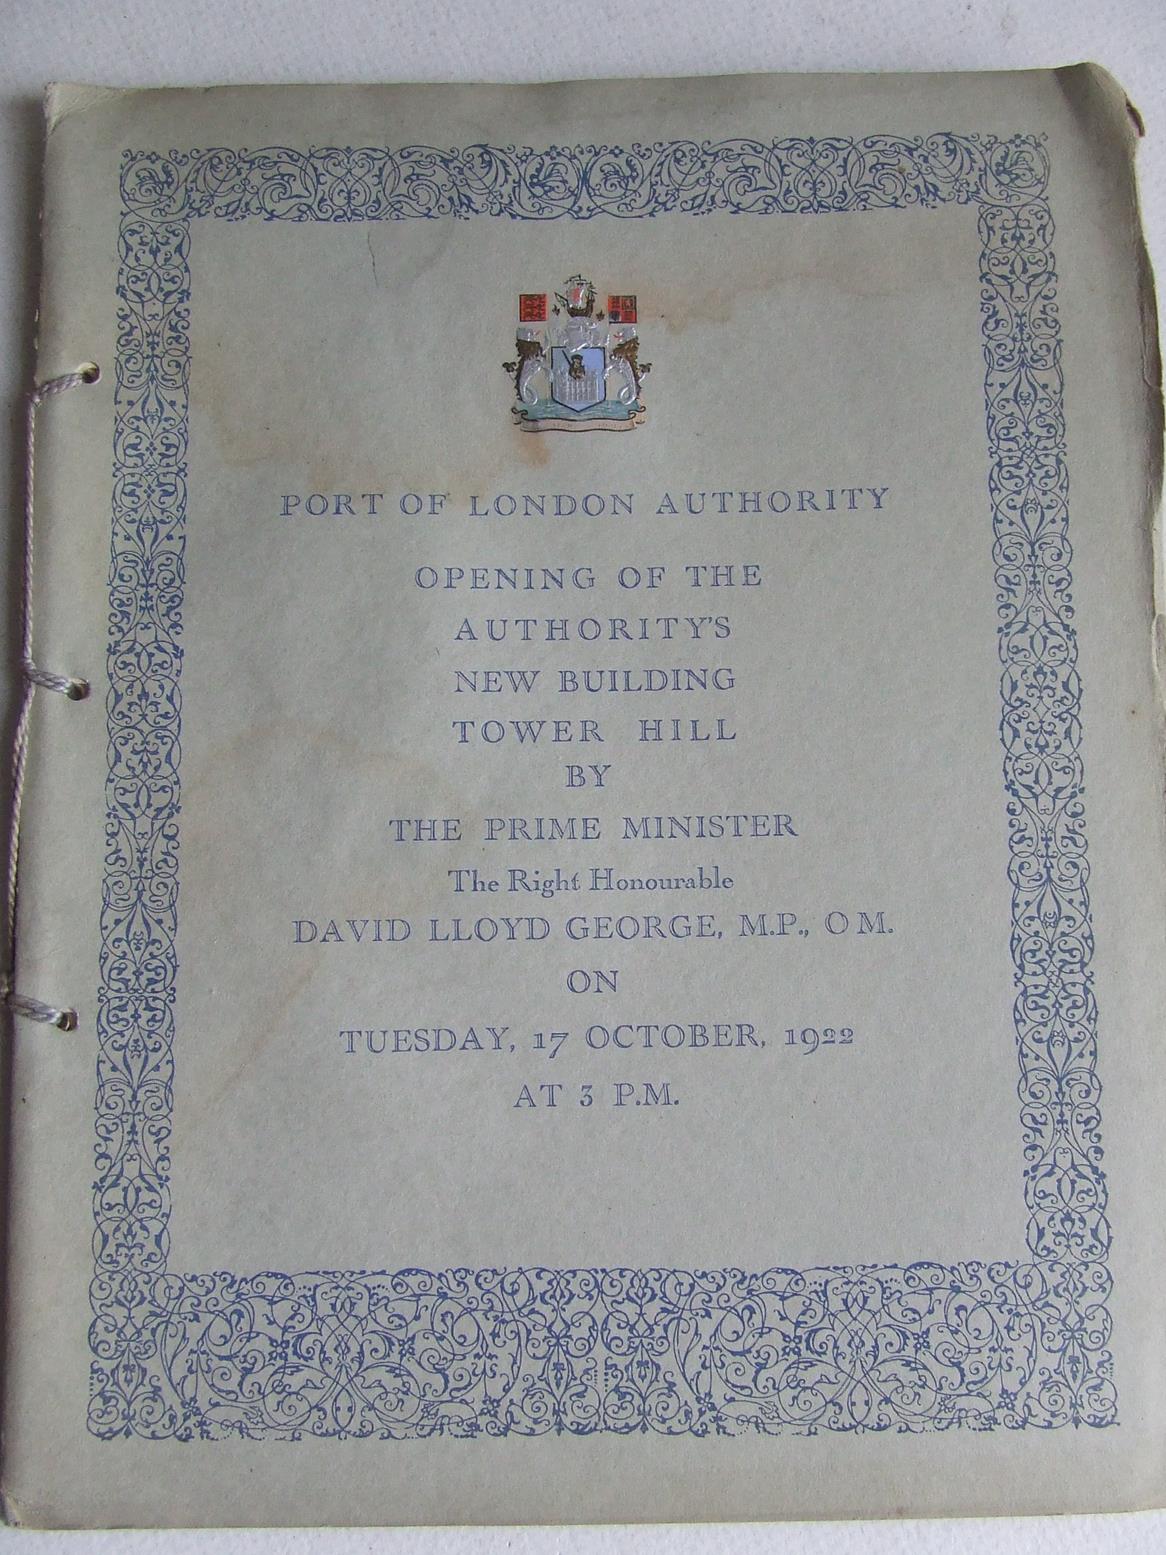 Port of London Authority - Opening of the Authority's New Building, Tower Hill